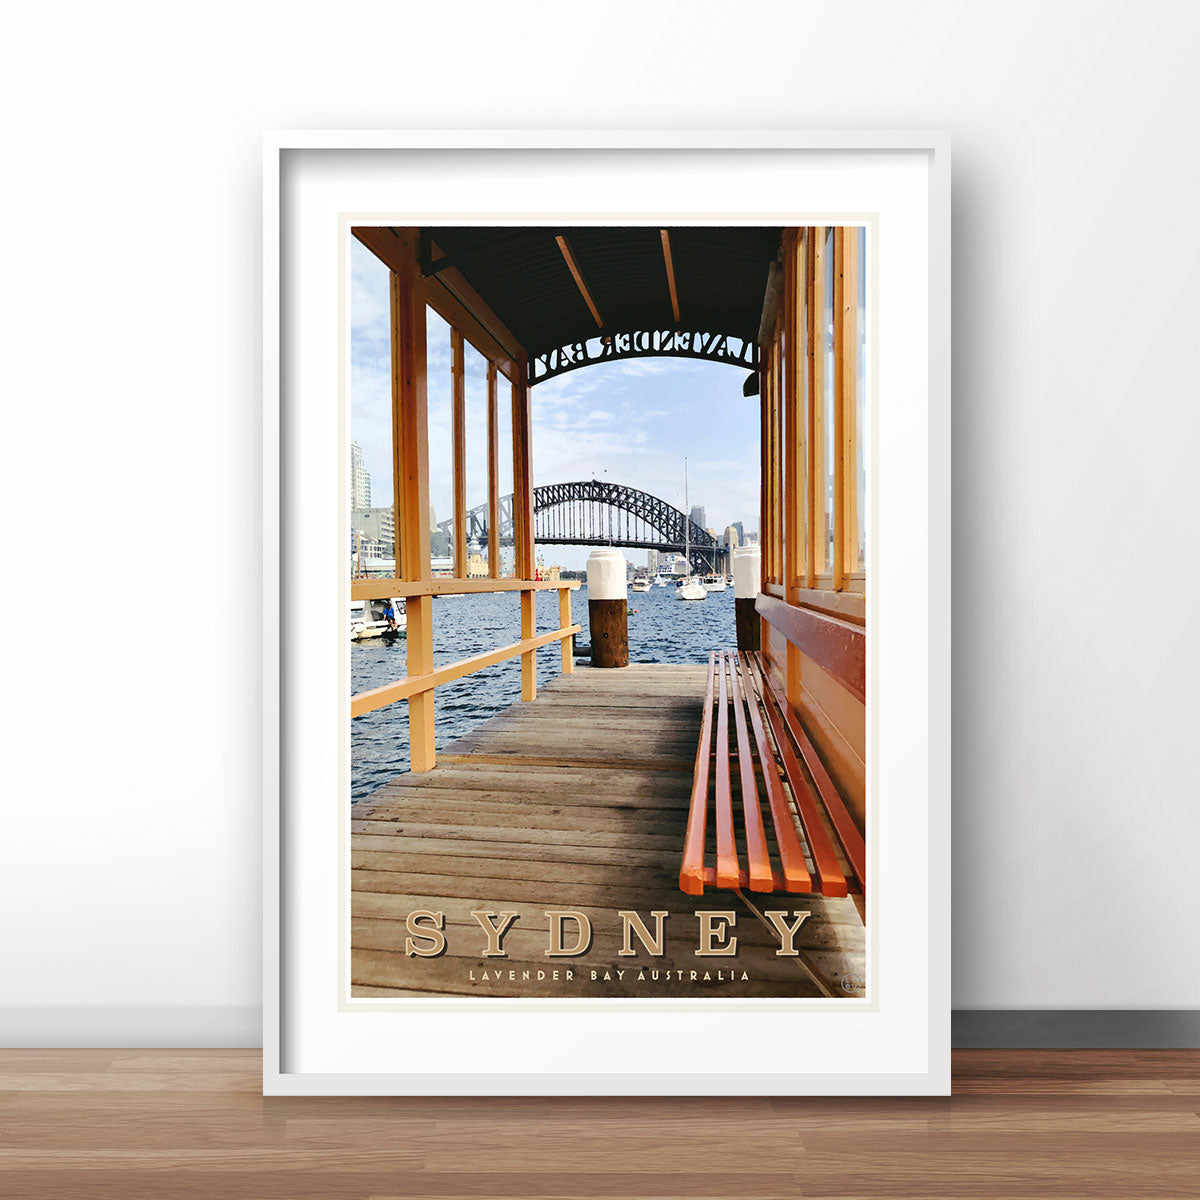 Sydney Lavender Bay vintage style travel poster by places we luv